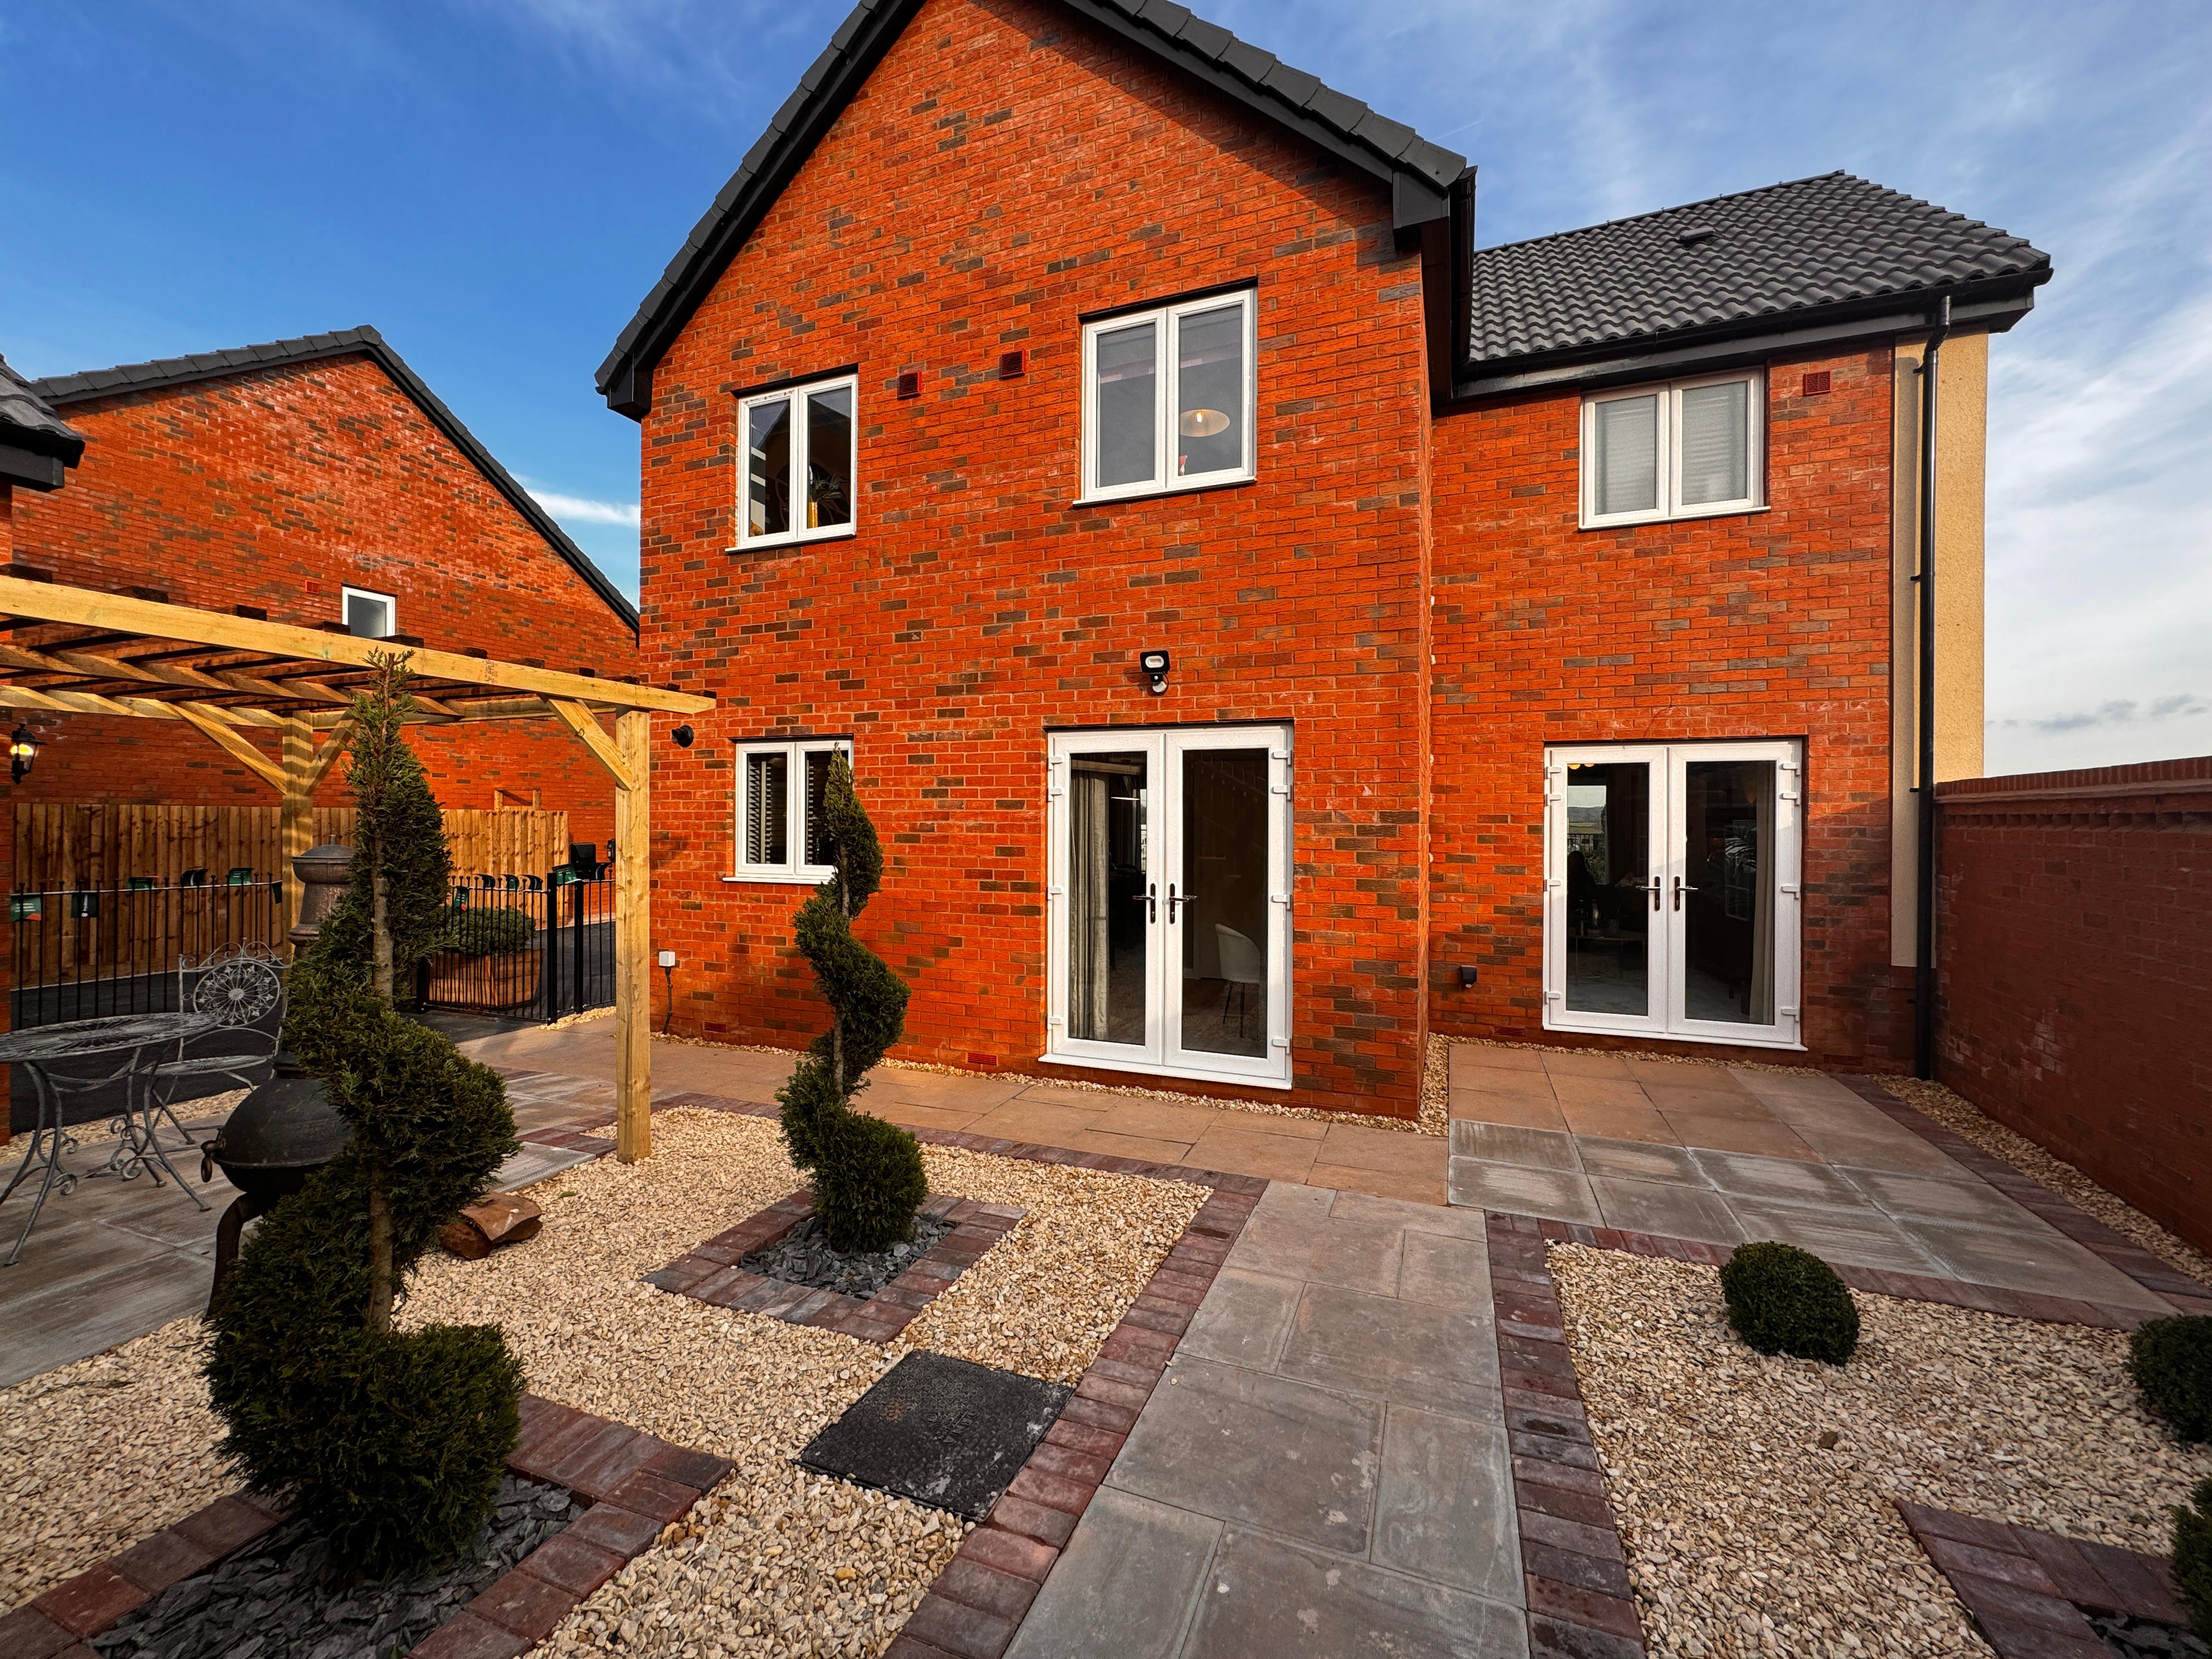 Persimmon Homes The View Redditch 01527 396673